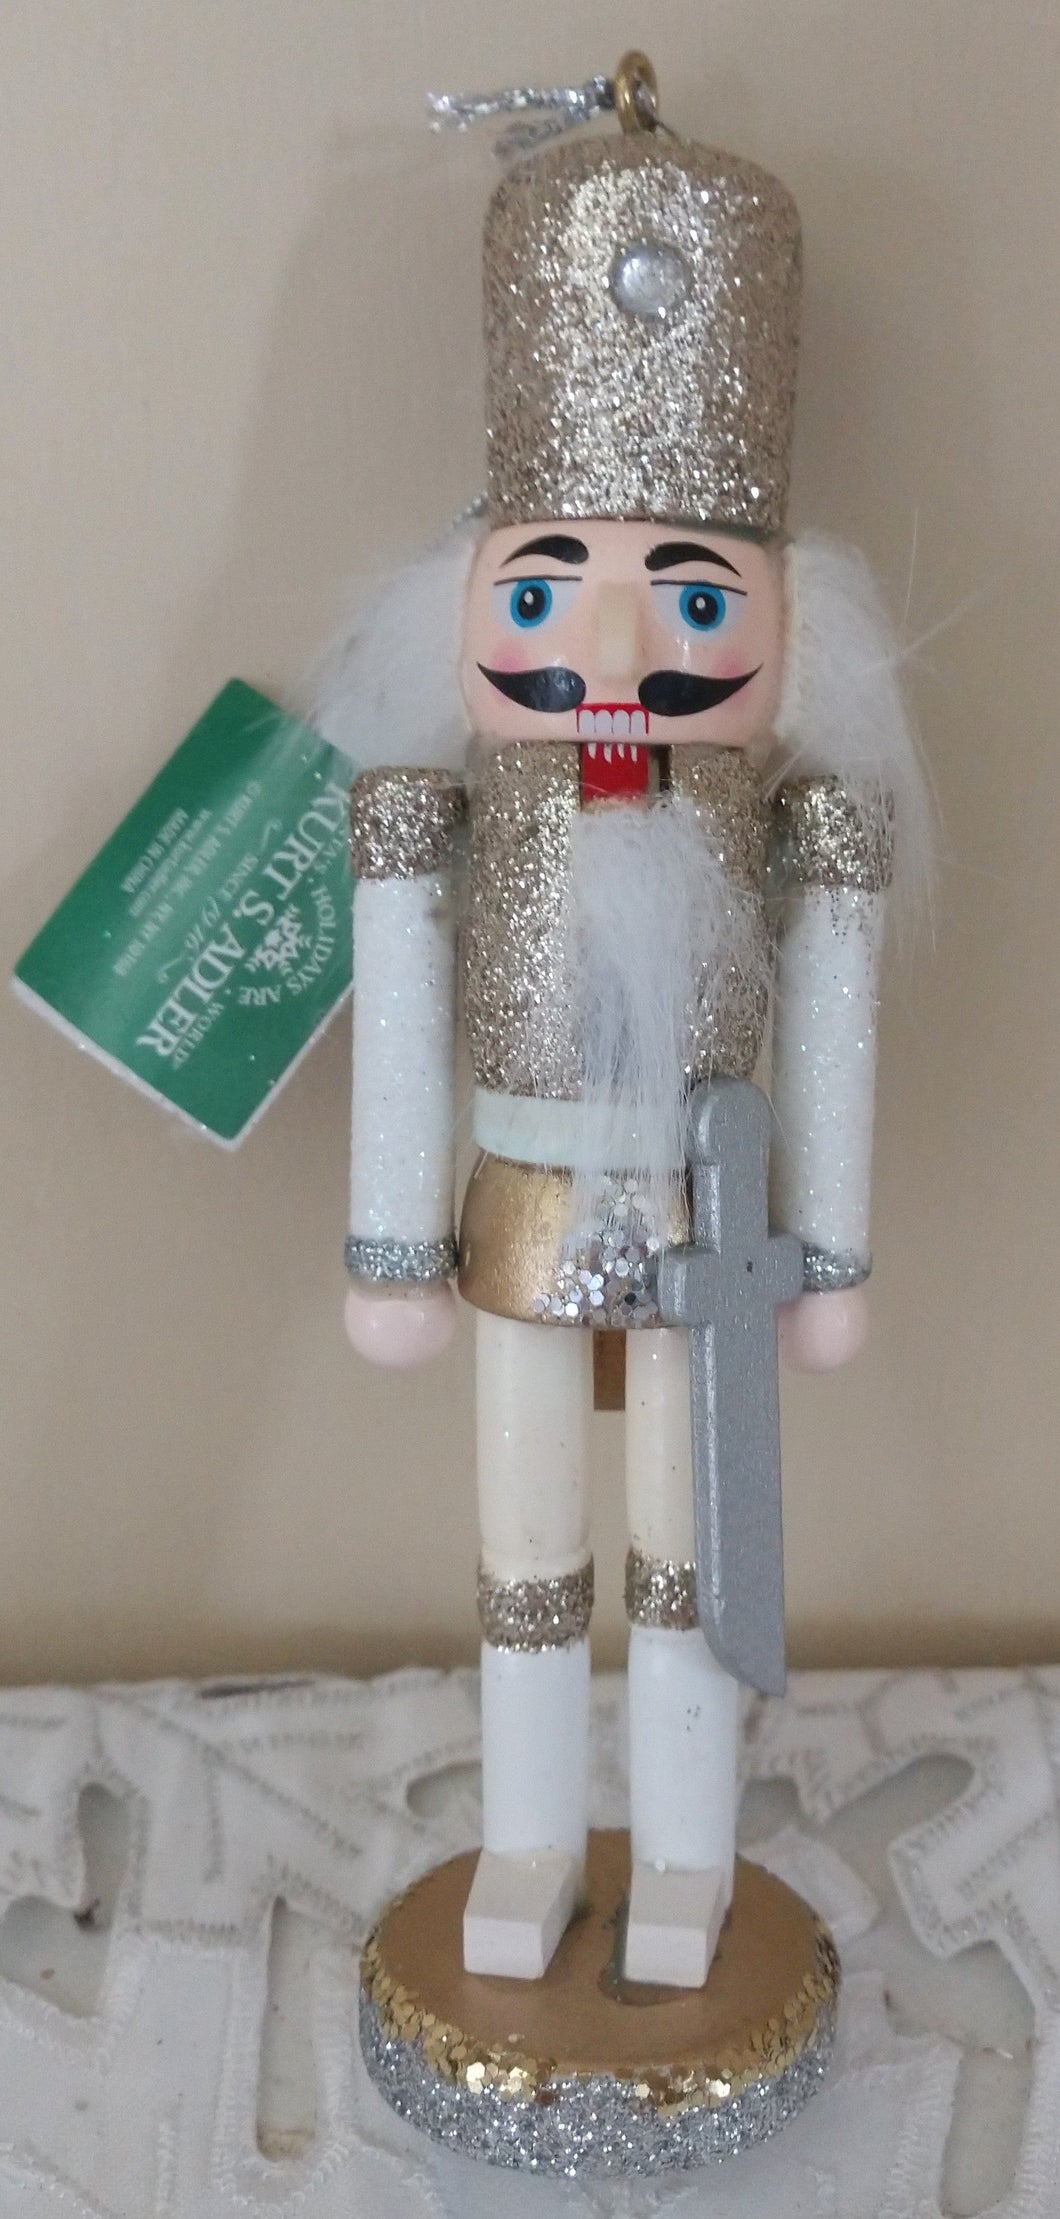 Wooden Gold/White Nutcracker Ornament with Sword 6